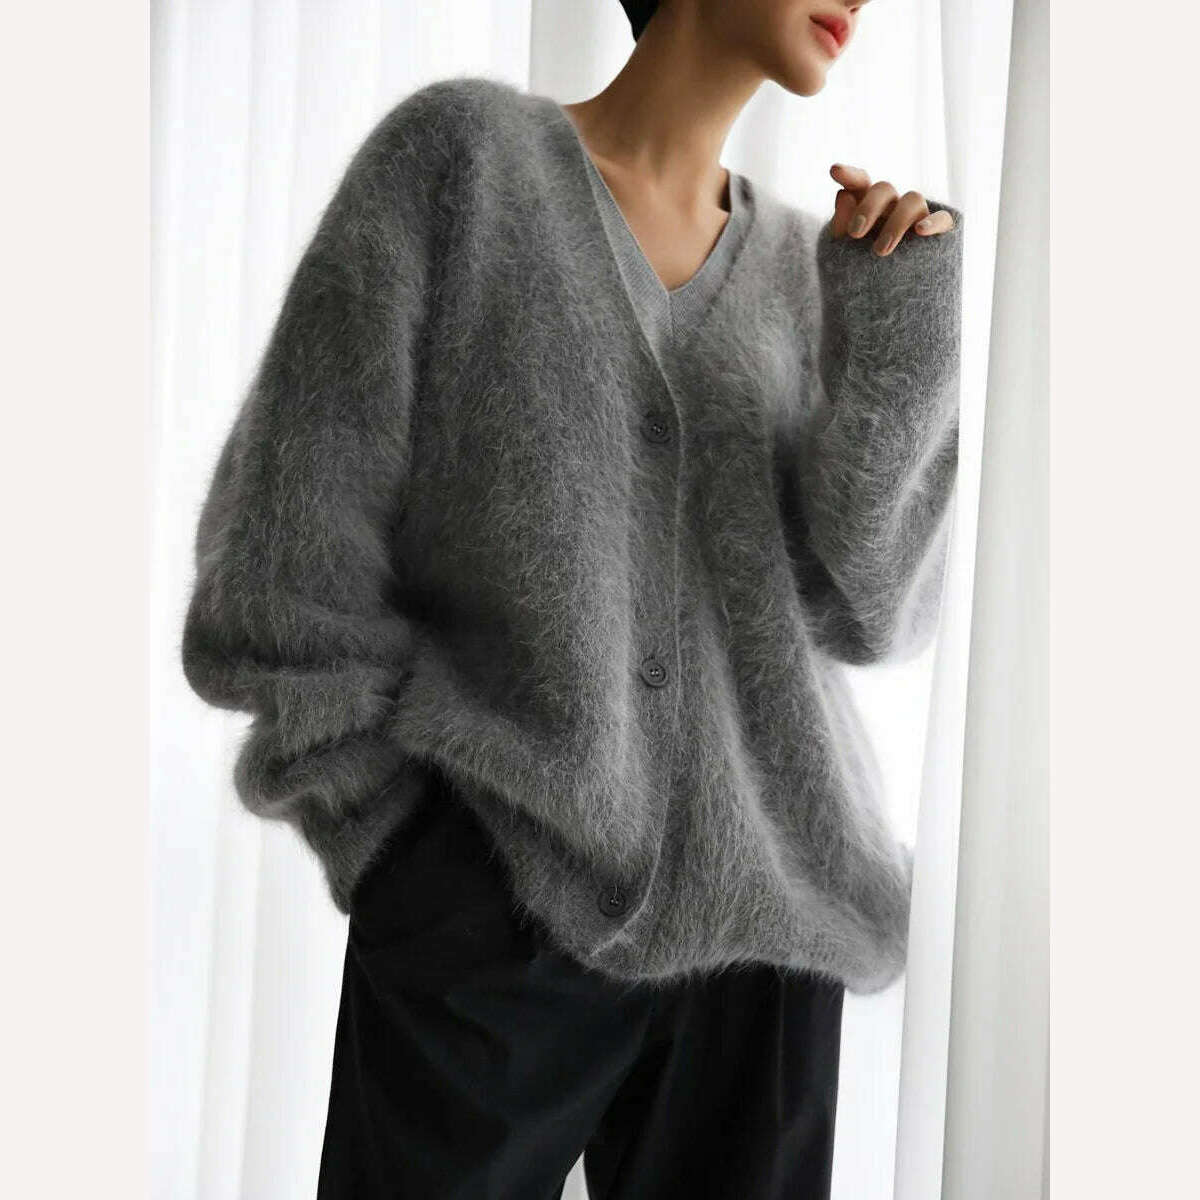 KIMLUD, Fluffy Mohair Cardigan For Women V-Neck Button Up Oversize Cardigan Sweater Autumn Winter Warm Knitted Outerwear, Dark Grey / S, KIMLUD Womens Clothes